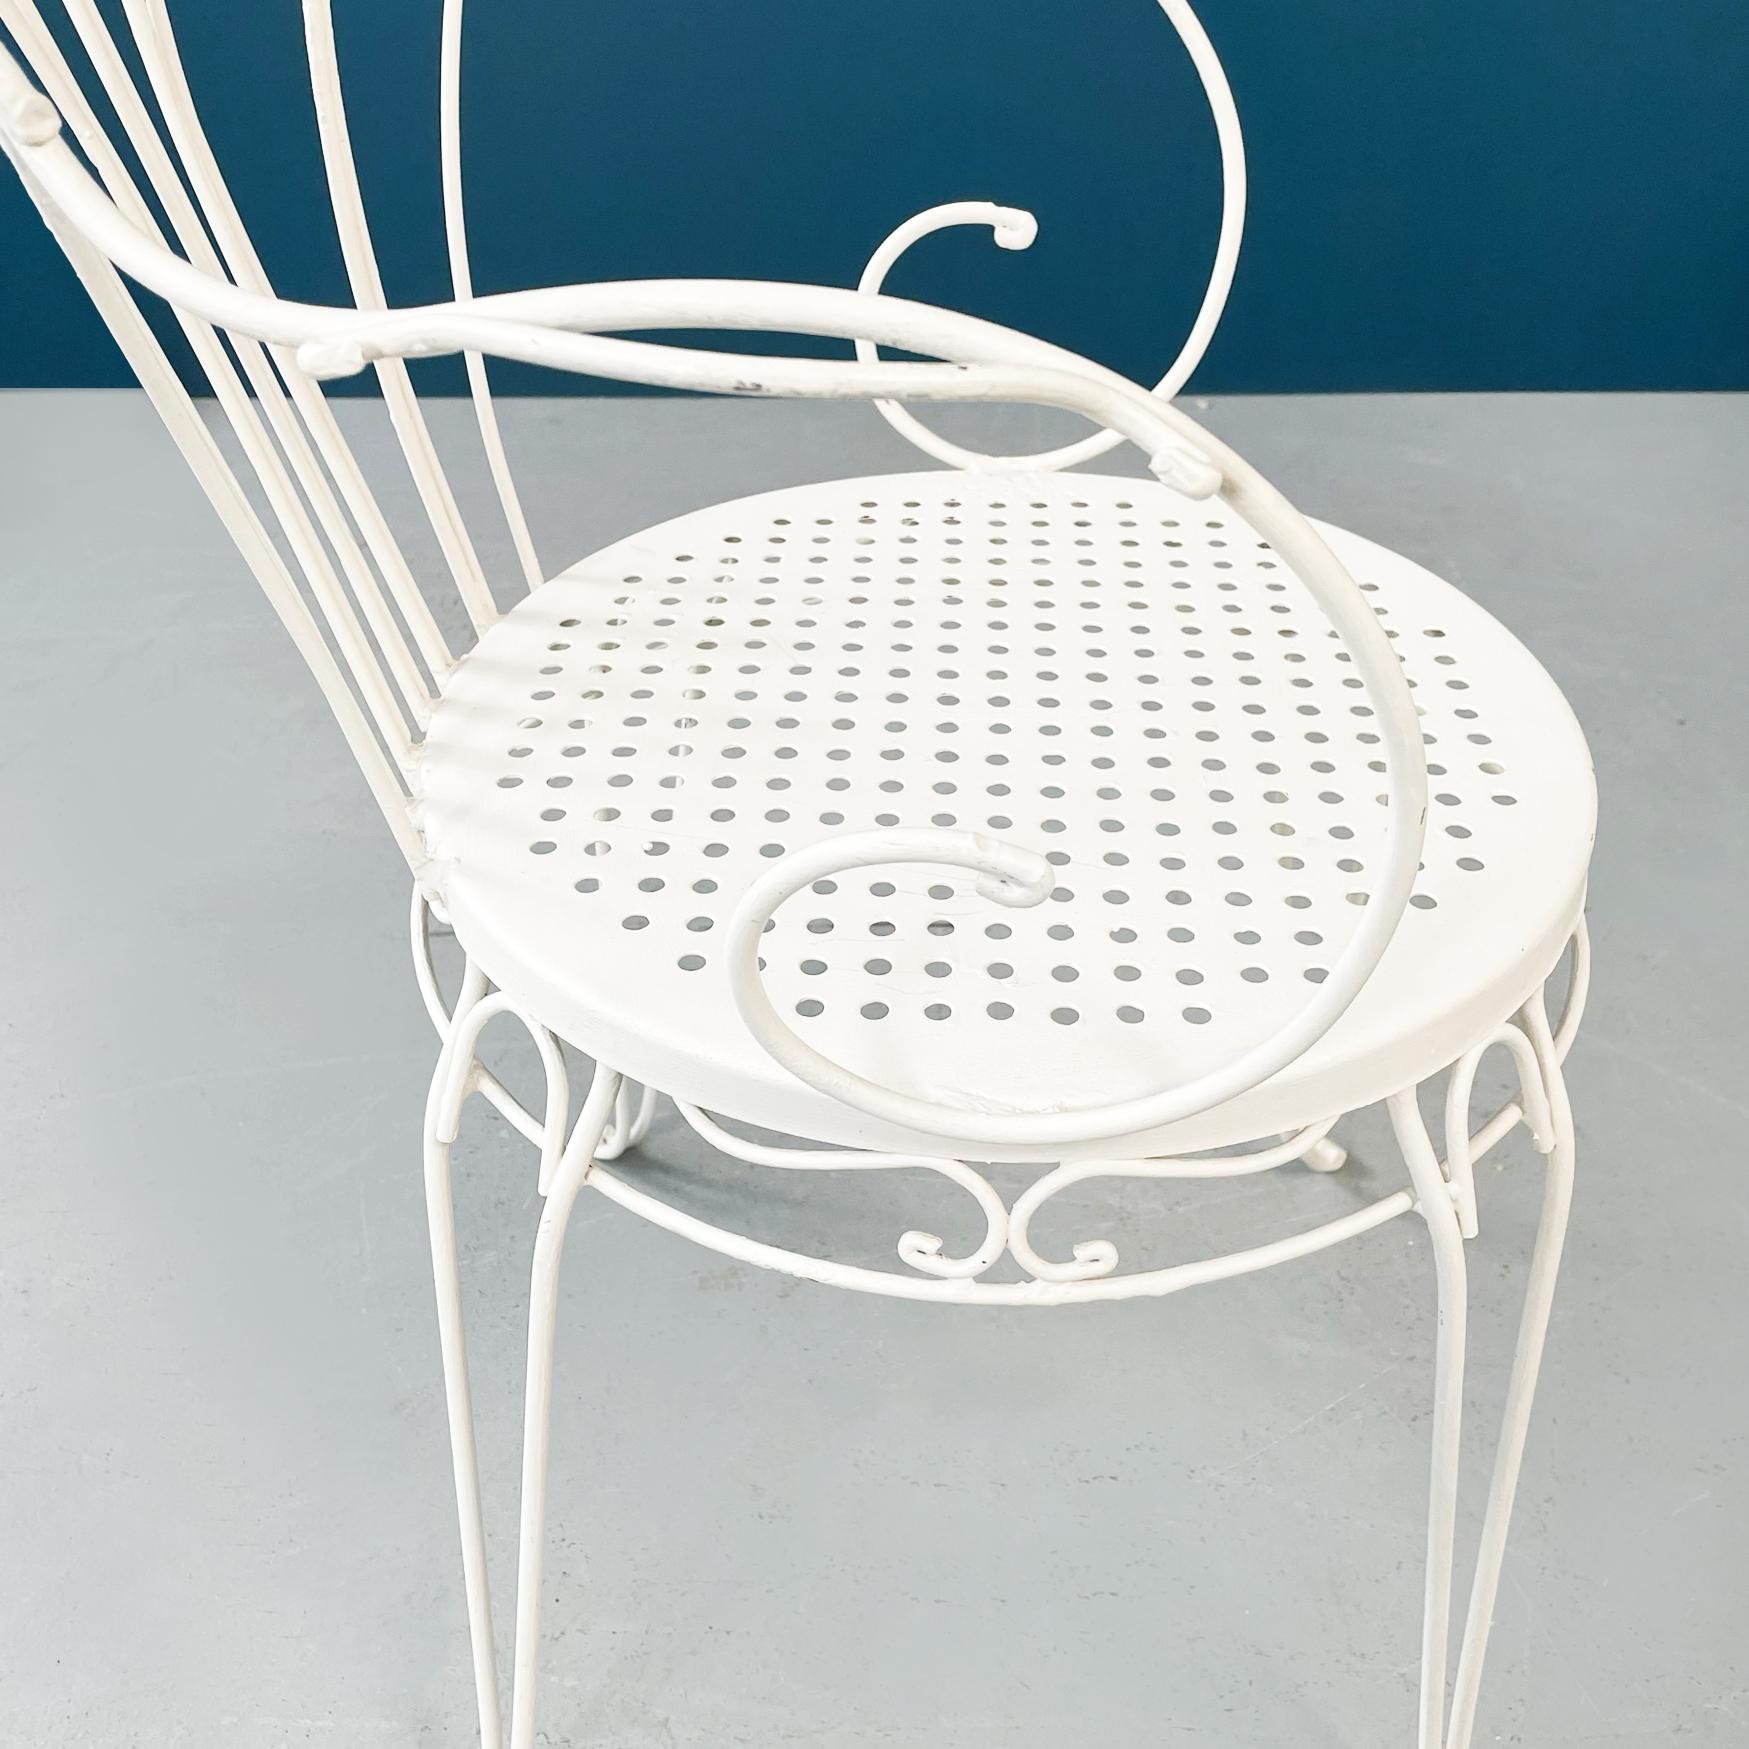 Italian Mid-Century Garden Chairs in White Wrought Iron with Curls, 1960s For Sale 6